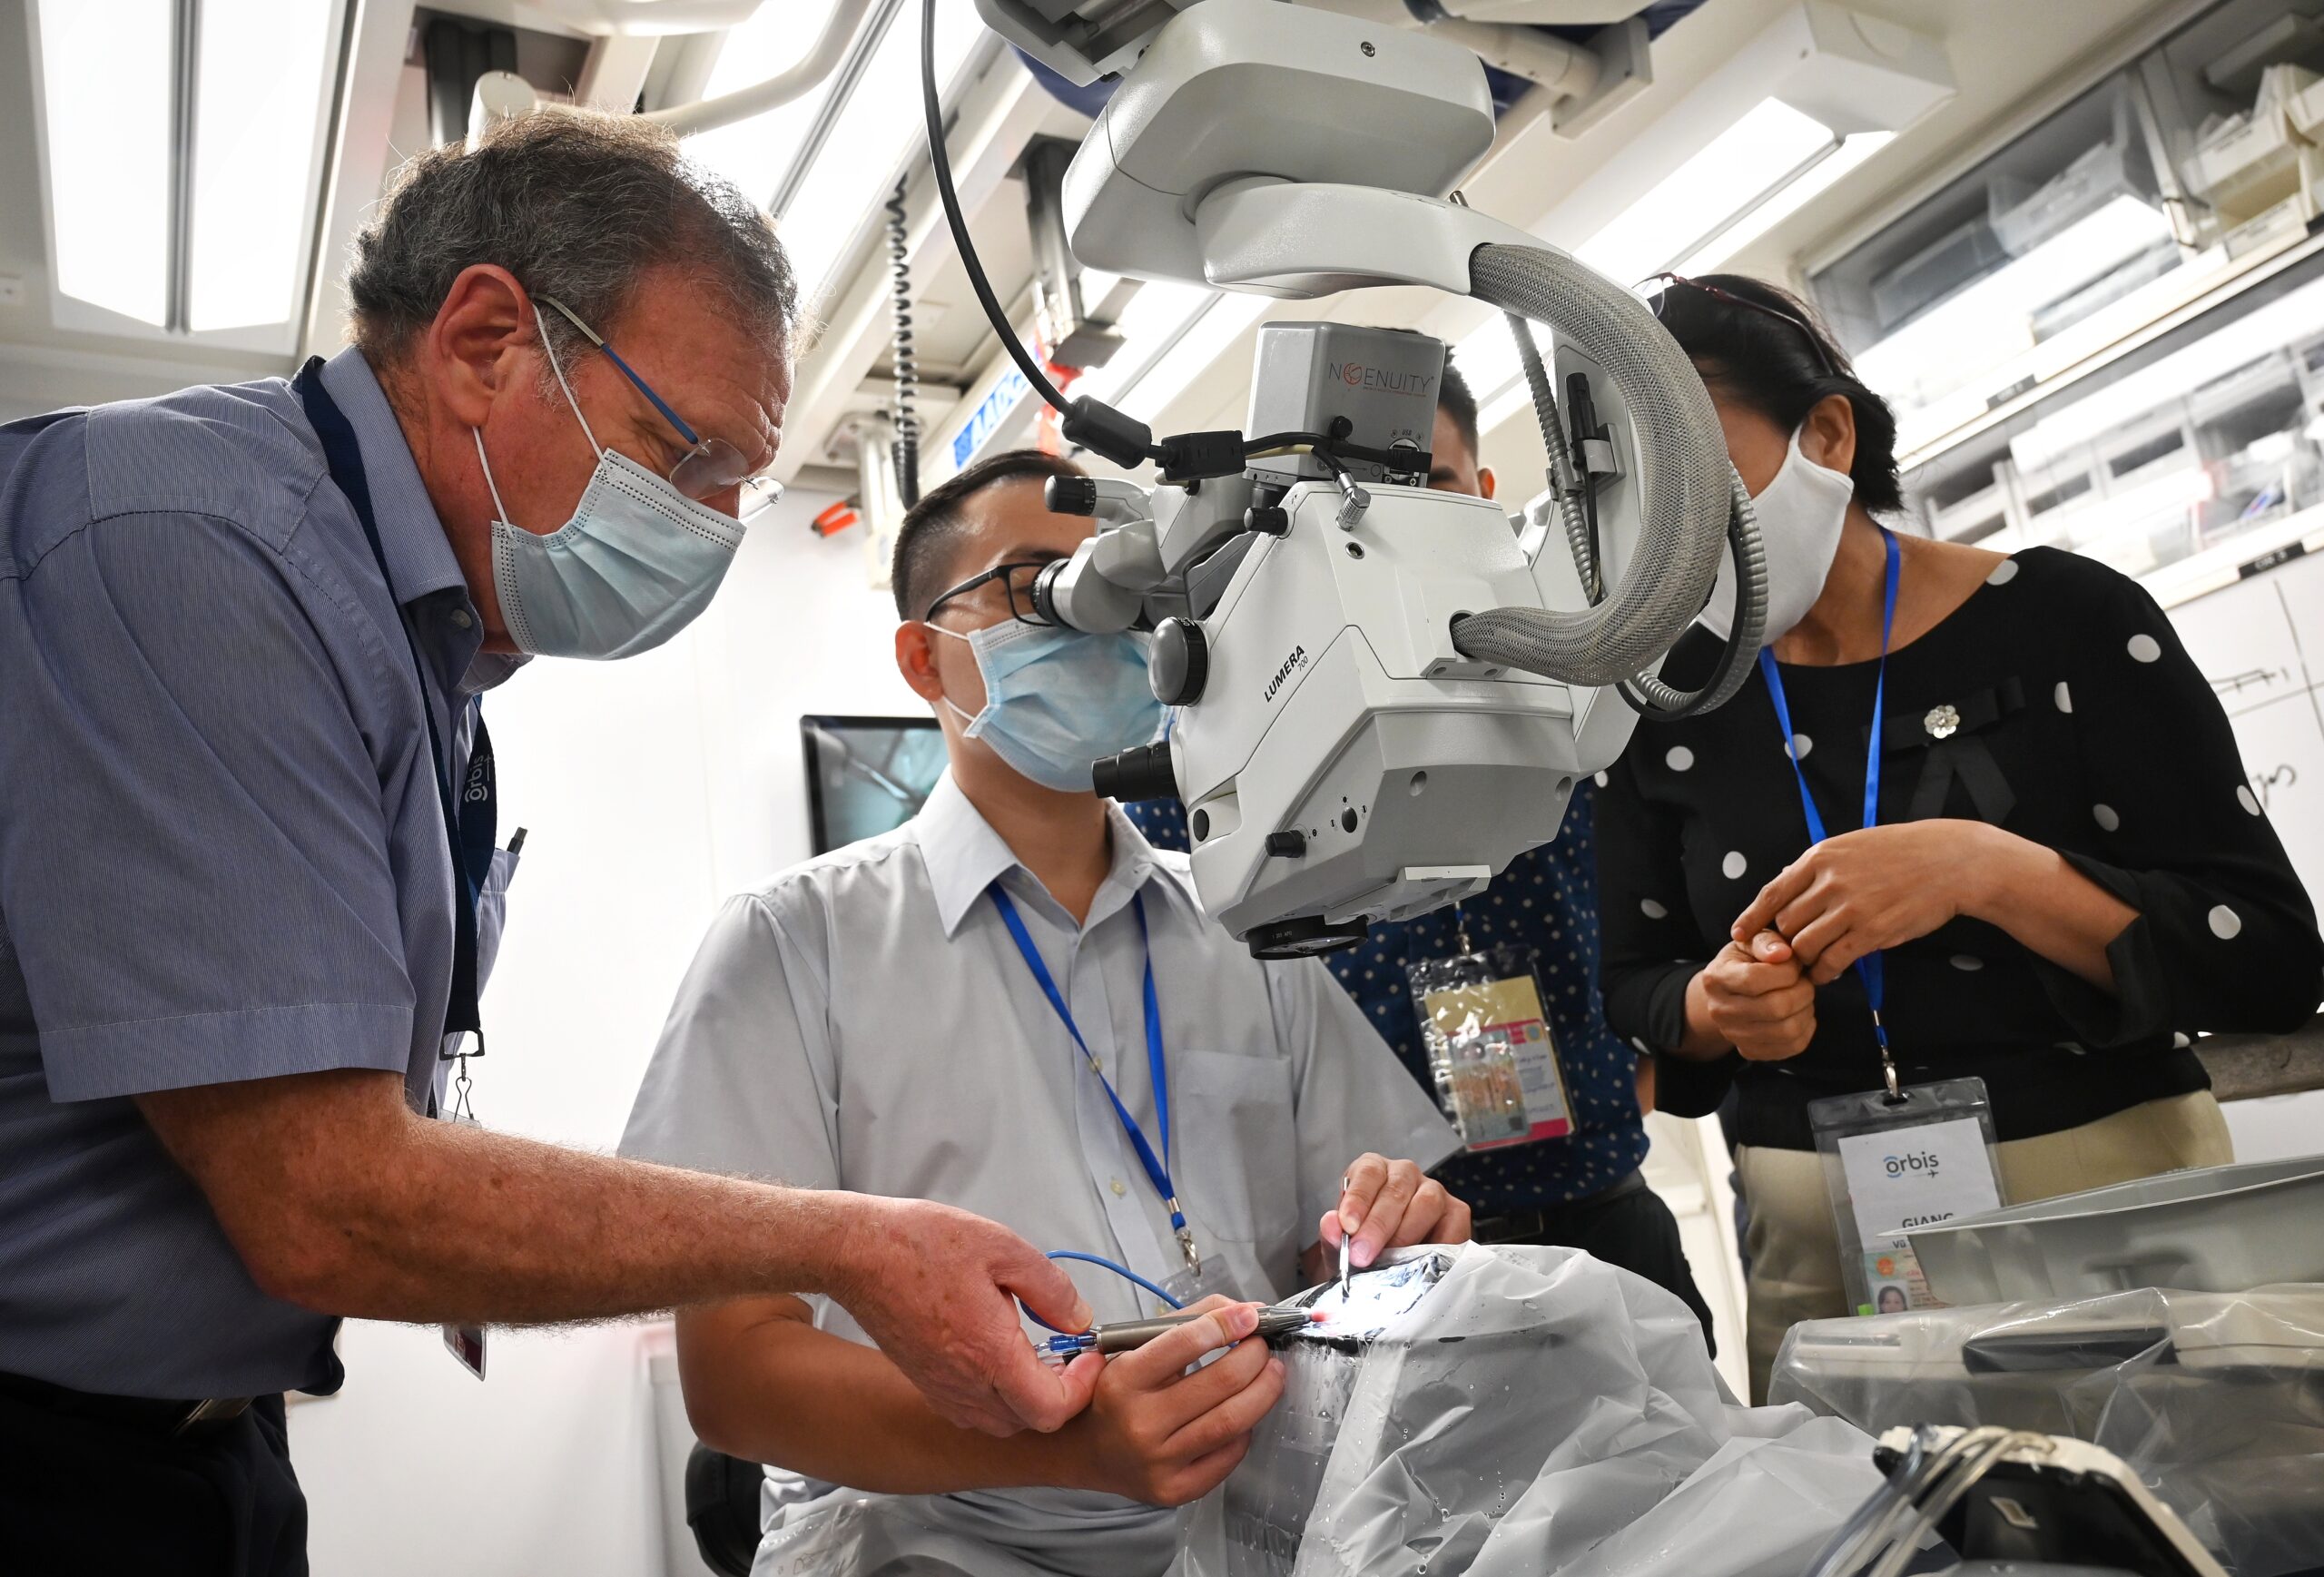 Ophthalmologist Larry Benjamin trains local eye surgeons in Vietnam for charity Orbis